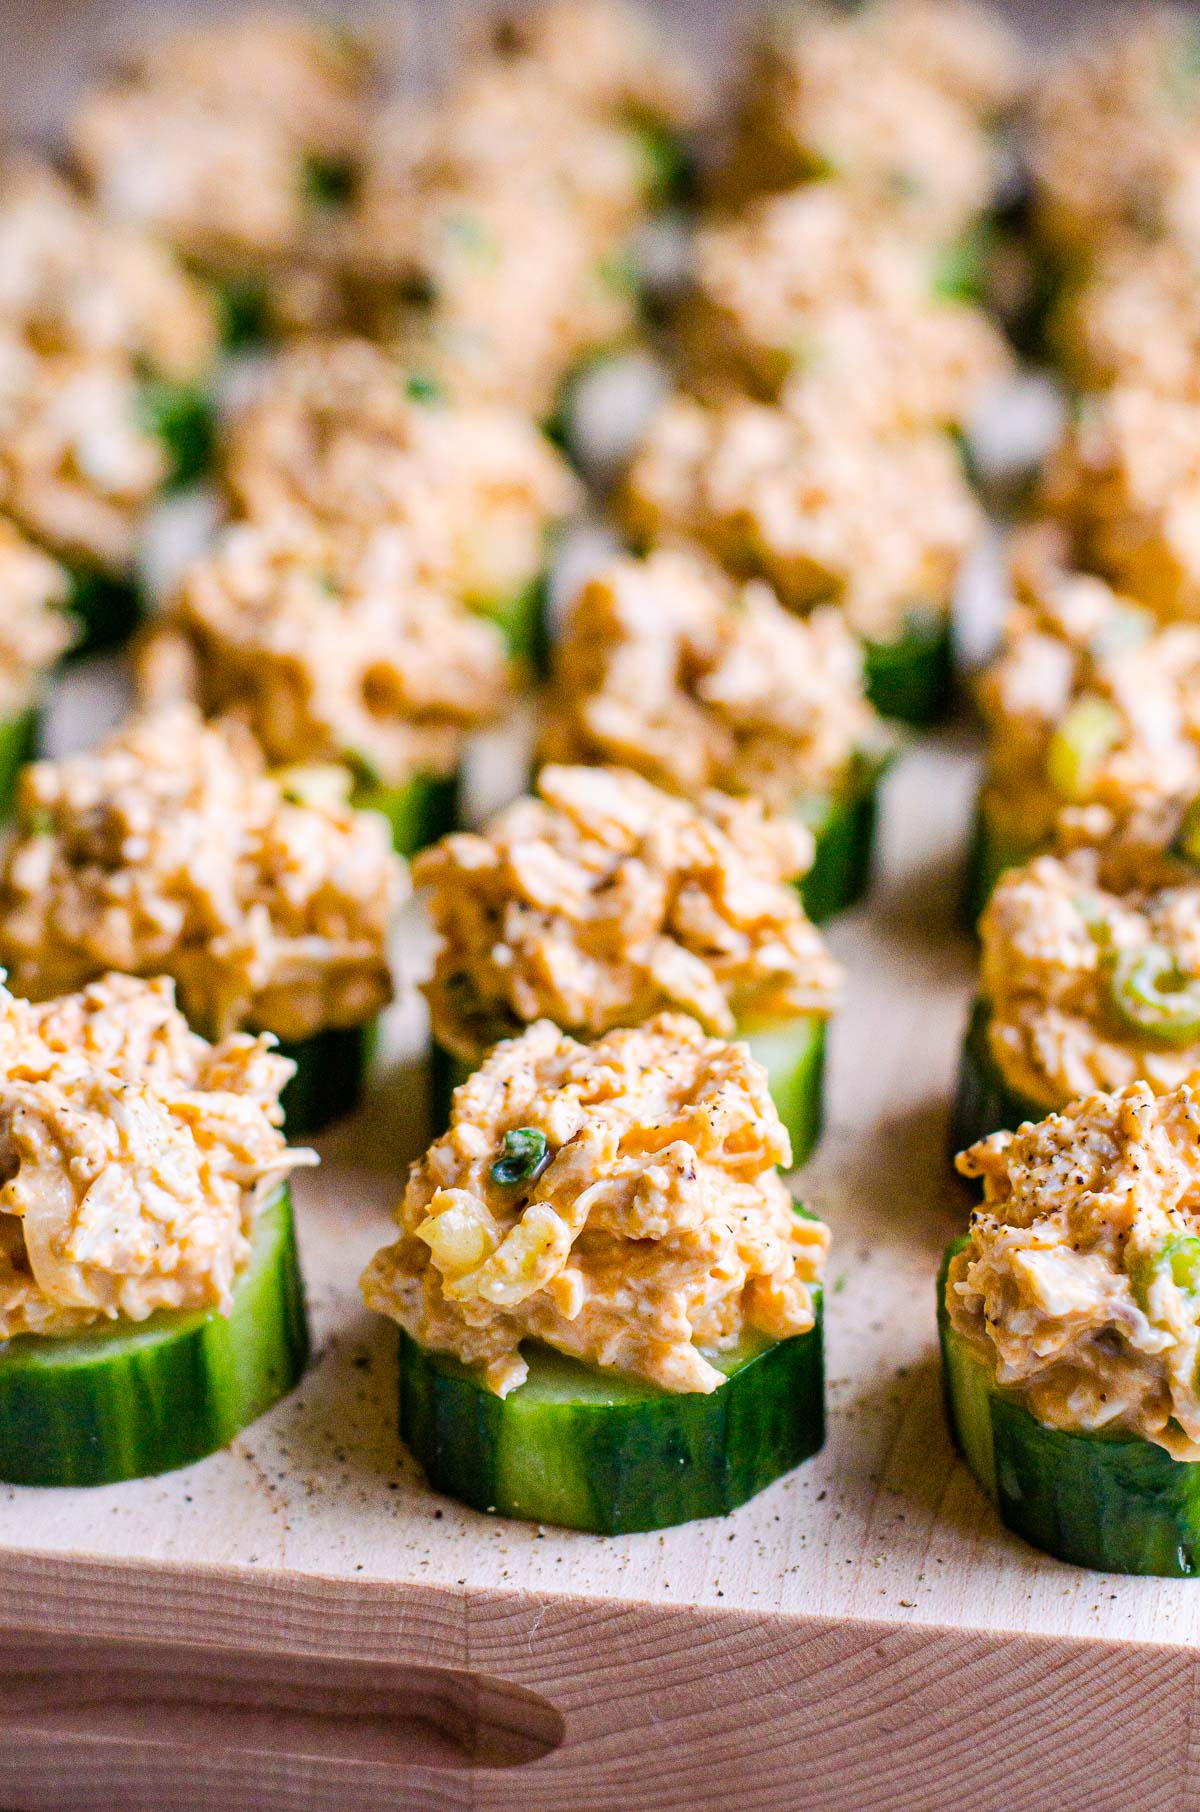 Cucumber snacks with buffalo chicken in a row on wood cutting board.